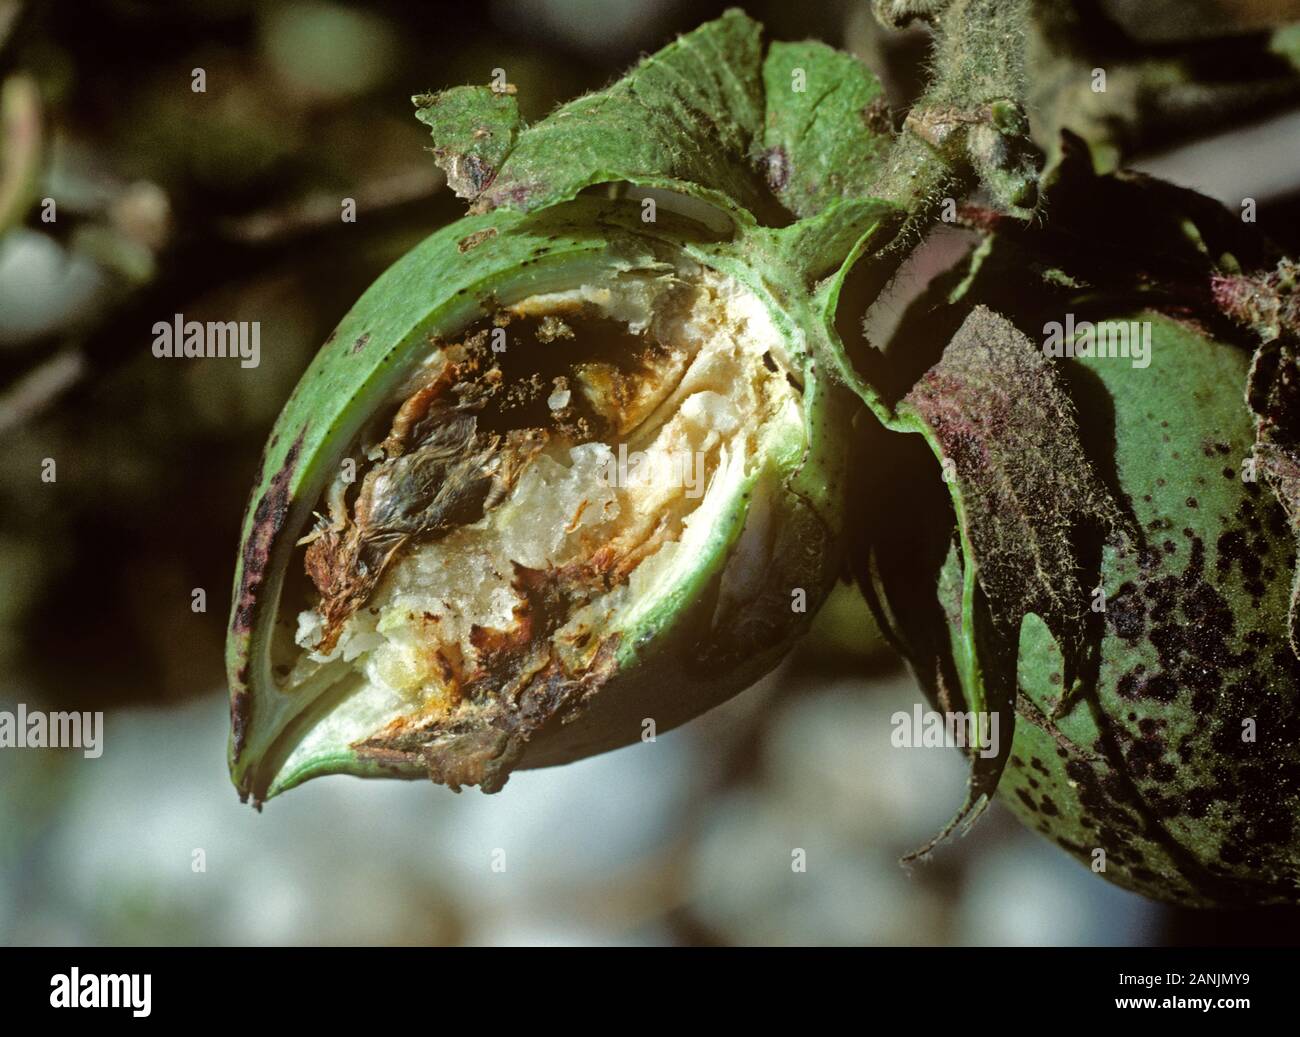 Cotton boll severely damaged by a boll weevil (Anthonomus grandis) larva, Mississipi, USA, October Stock Photo